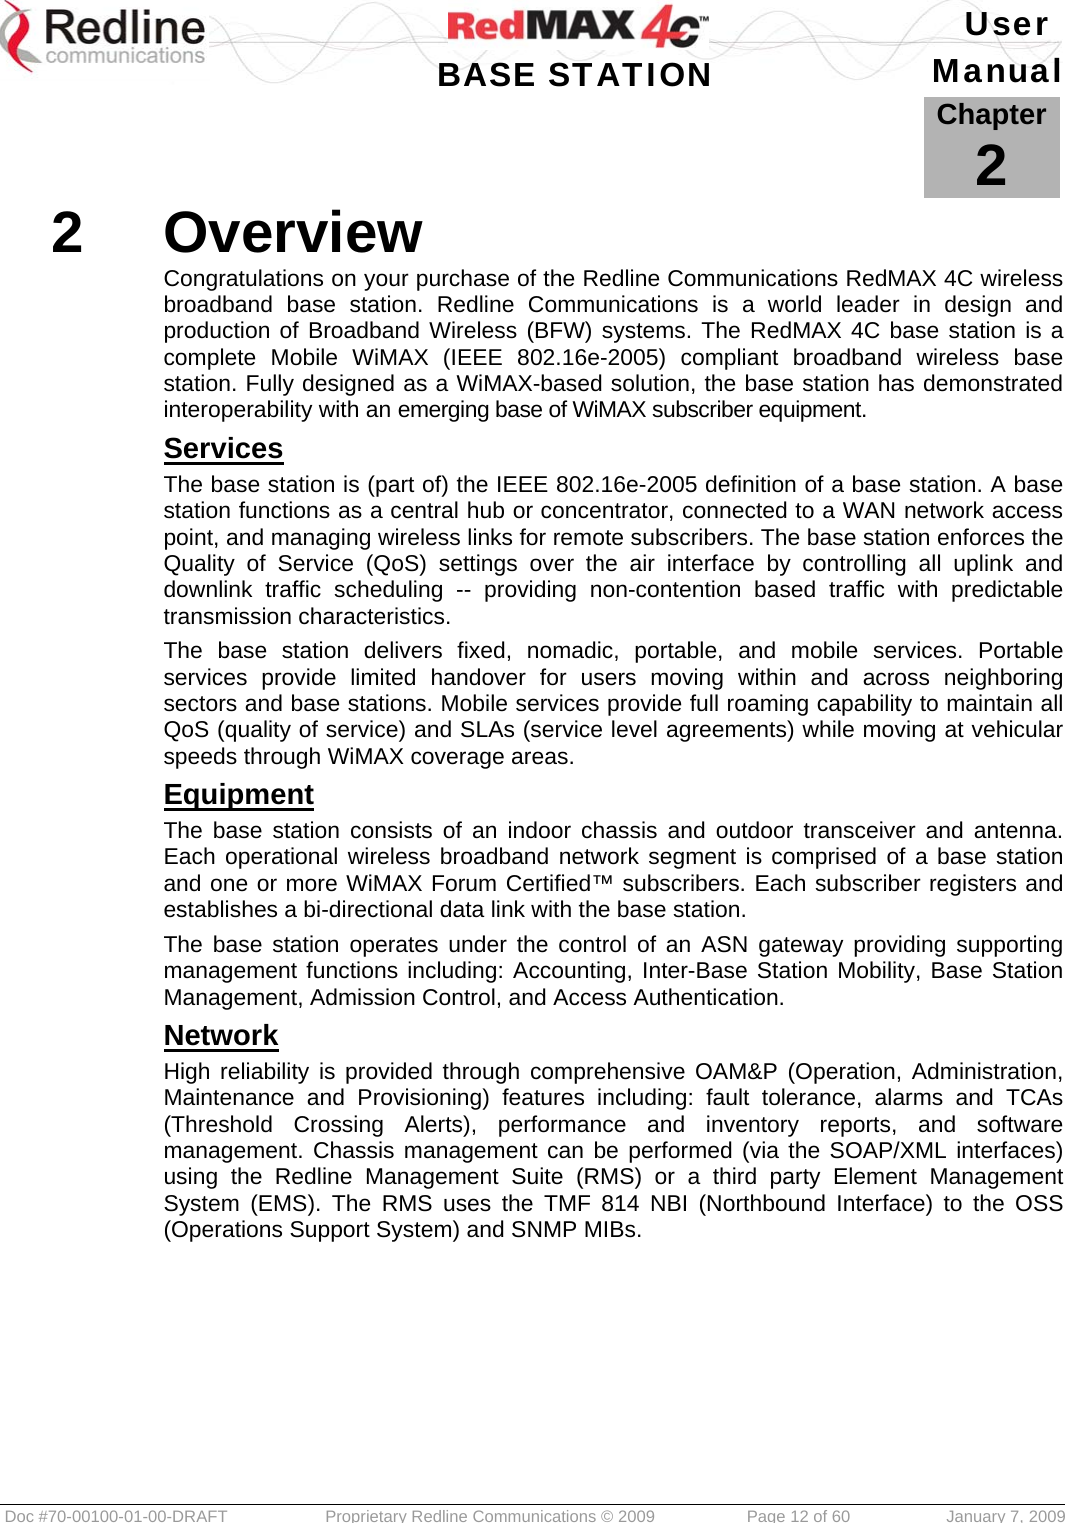   User  BASE STATION Manual  Doc #70-00100-01-00-DRAFT  Proprietary Redline Communications © 2009   Page 12 of 60  January 7, 2009            Chapter2 2  Overview Congratulations on your purchase of the Redline Communications RedMAX 4C wireless broadband base station. Redline Communications is a world leader in design and production of Broadband Wireless (BFW) systems. The RedMAX 4C base station is a complete Mobile WiMAX (IEEE 802.16e-2005) compliant broadband wireless base station. Fully designed as a WiMAX-based solution, the base station has demonstrated interoperability with an emerging base of WiMAX subscriber equipment. Services The base station is (part of) the IEEE 802.16e-2005 definition of a base station. A base station functions as a central hub or concentrator, connected to a WAN network access point, and managing wireless links for remote subscribers. The base station enforces the Quality of Service (QoS) settings over the air interface by controlling all uplink and downlink traffic scheduling -- providing non-contention based traffic with predictable transmission characteristics. The base station delivers fixed, nomadic, portable, and mobile services. Portable services provide limited handover for users moving within and across neighboring sectors and base stations. Mobile services provide full roaming capability to maintain all QoS (quality of service) and SLAs (service level agreements) while moving at vehicular speeds through WiMAX coverage areas. Equipment The base station consists of an indoor chassis and outdoor transceiver and antenna. Each operational wireless broadband network segment is comprised of a base station and one or more WiMAX Forum Certified™ subscribers. Each subscriber registers and establishes a bi-directional data link with the base station. The base station operates under the control of an ASN gateway providing supporting management functions including: Accounting, Inter-Base Station Mobility, Base Station Management, Admission Control, and Access Authentication. Network High reliability is provided through comprehensive OAM&amp;P (Operation, Administration, Maintenance and Provisioning) features including: fault tolerance, alarms and TCAs (Threshold Crossing Alerts), performance and inventory reports, and software management. Chassis management can be performed (via the SOAP/XML interfaces) using the Redline Management Suite (RMS) or a third party Element Management System (EMS). The RMS uses the TMF 814 NBI (Northbound Interface) to the OSS (Operations Support System) and SNMP MIBs.   